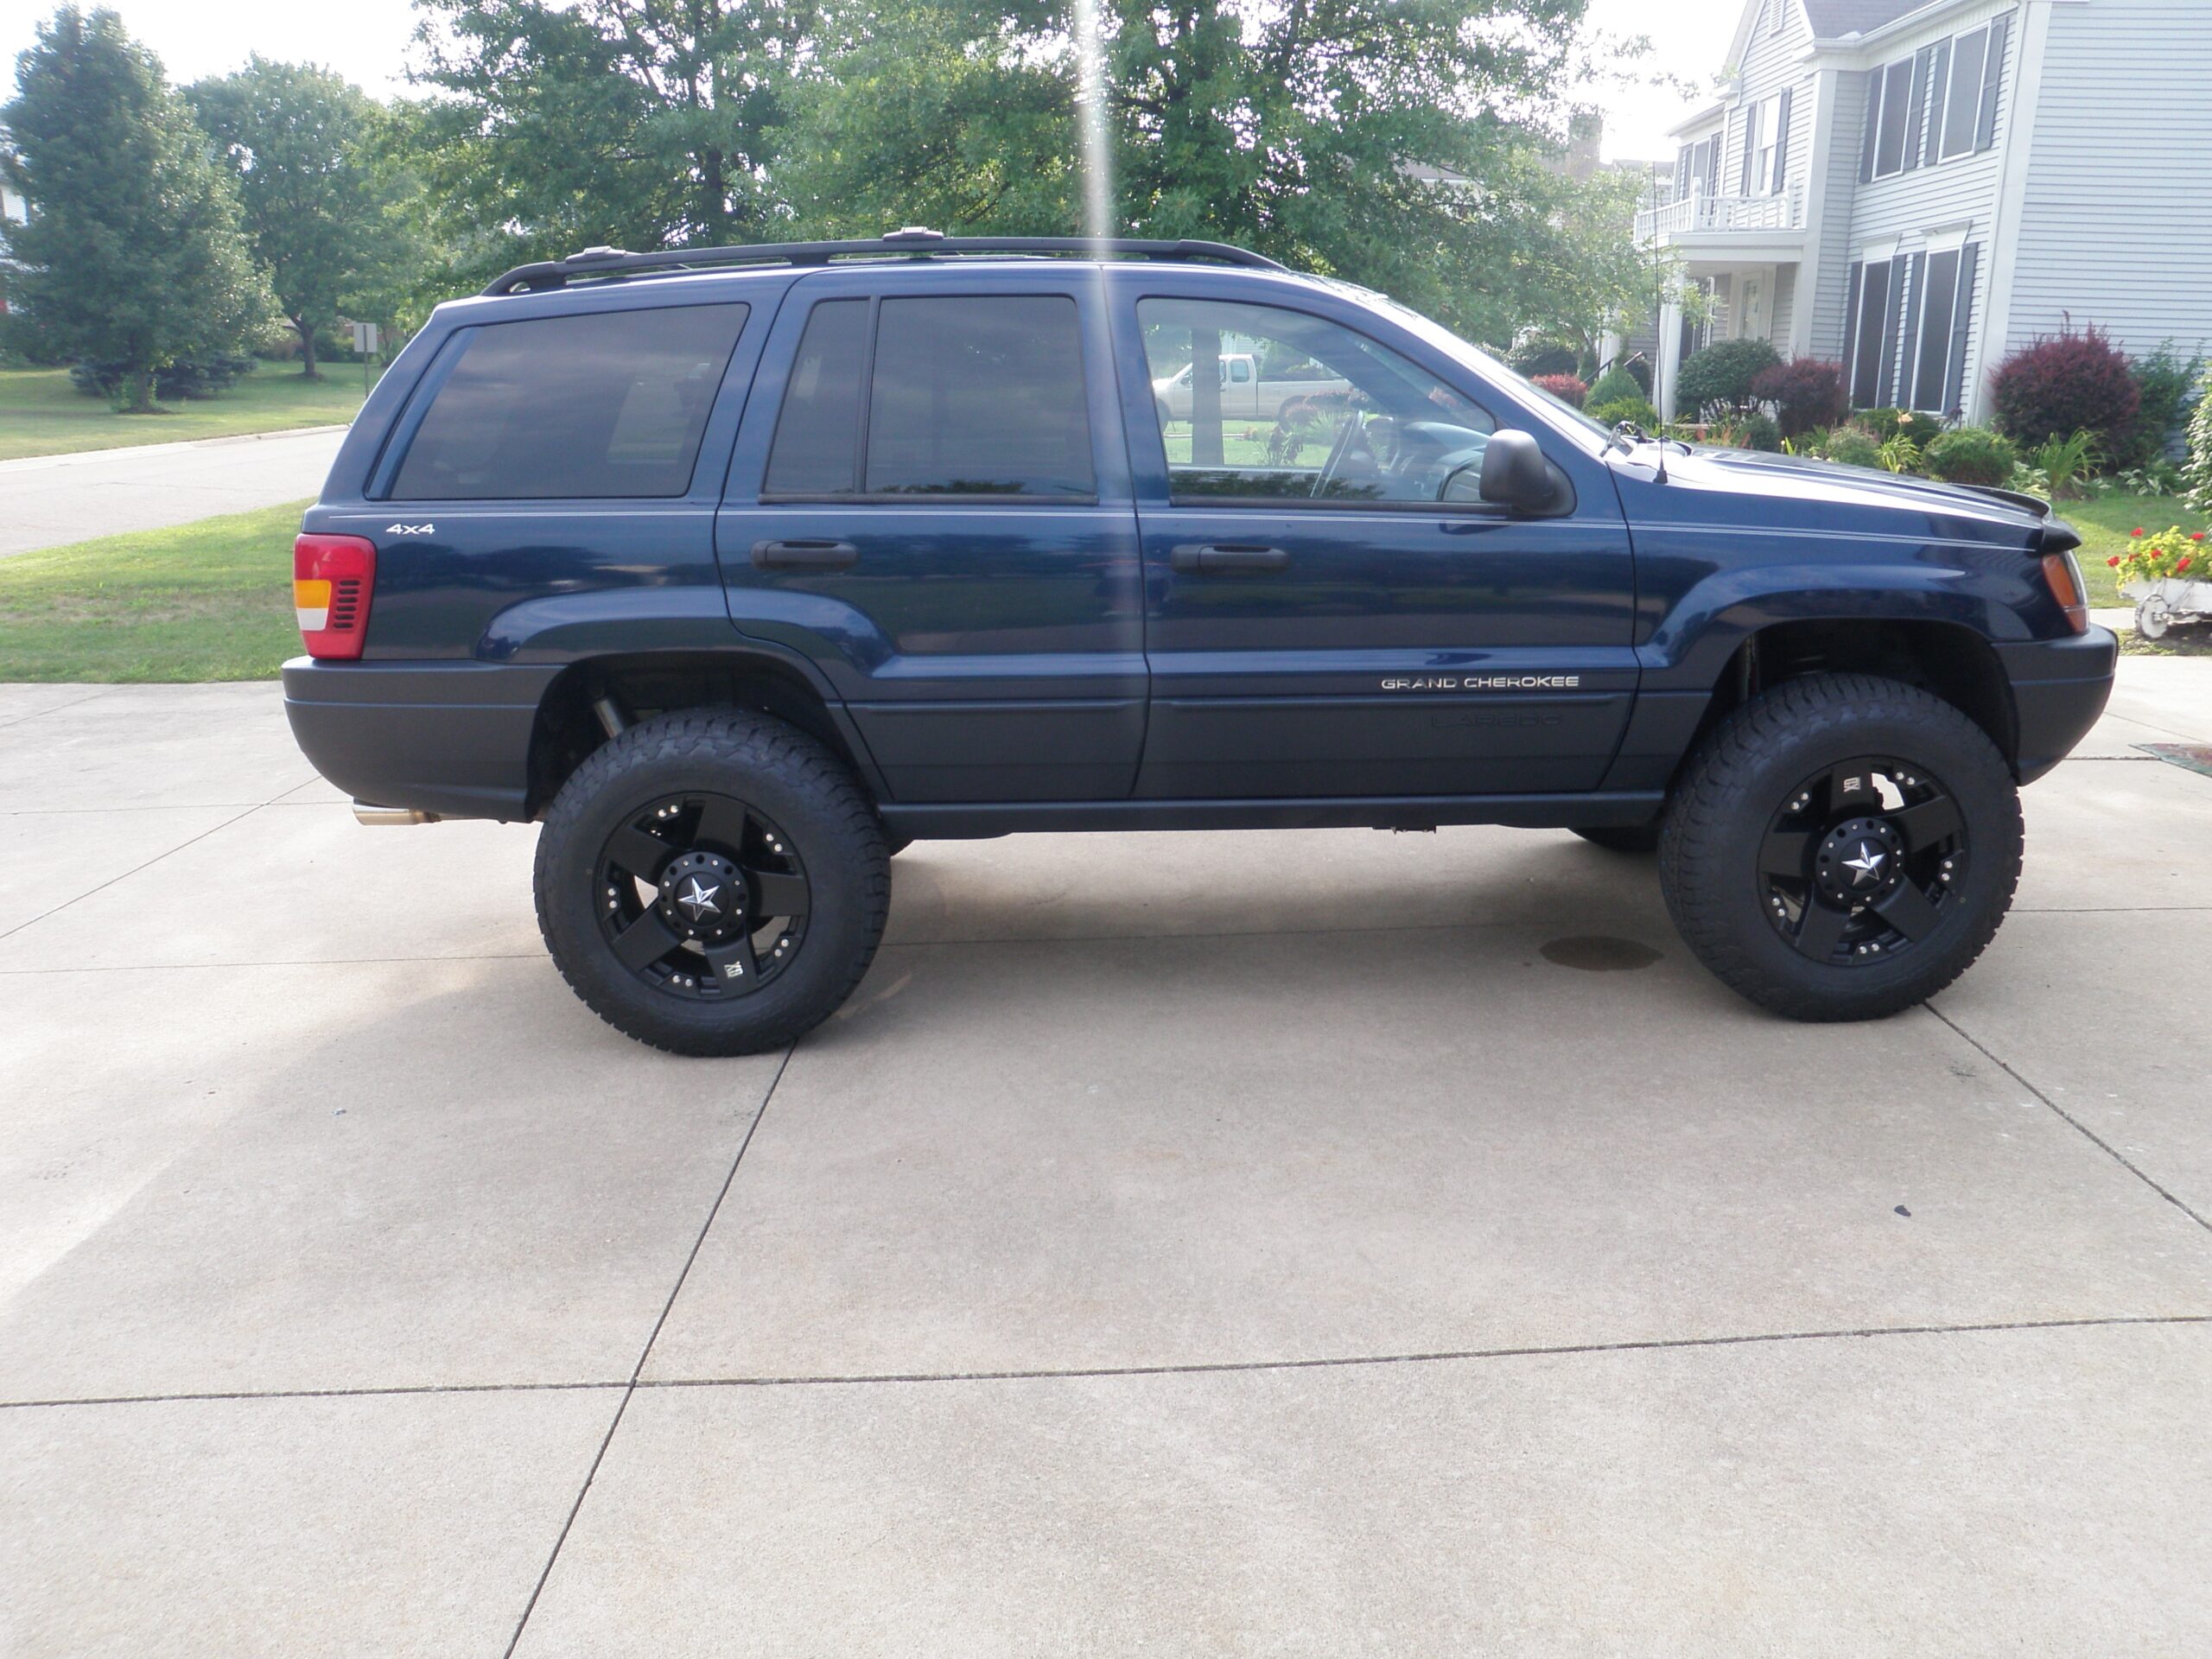 2001 jeep grand cherokee fan only works on high